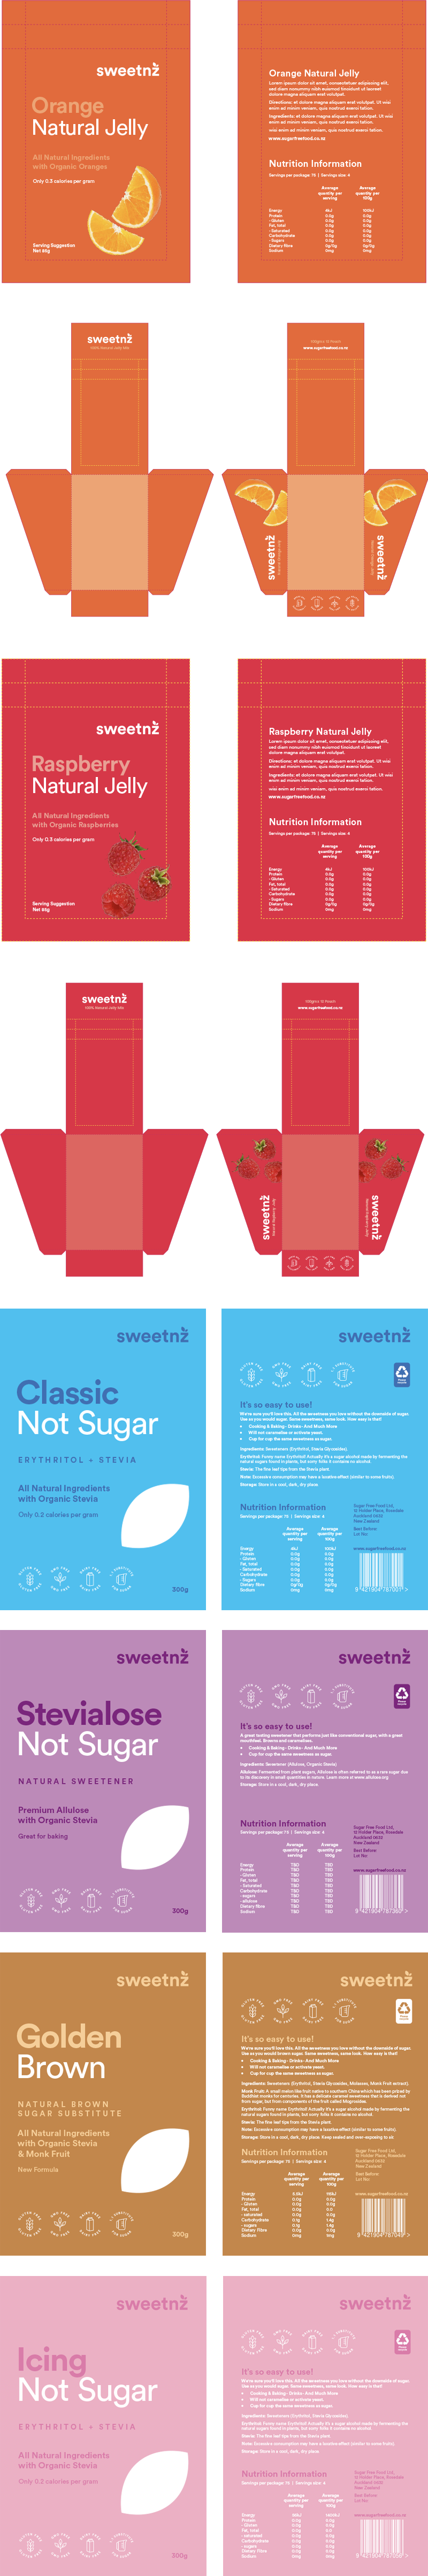 Sweet new look for SweetNZ